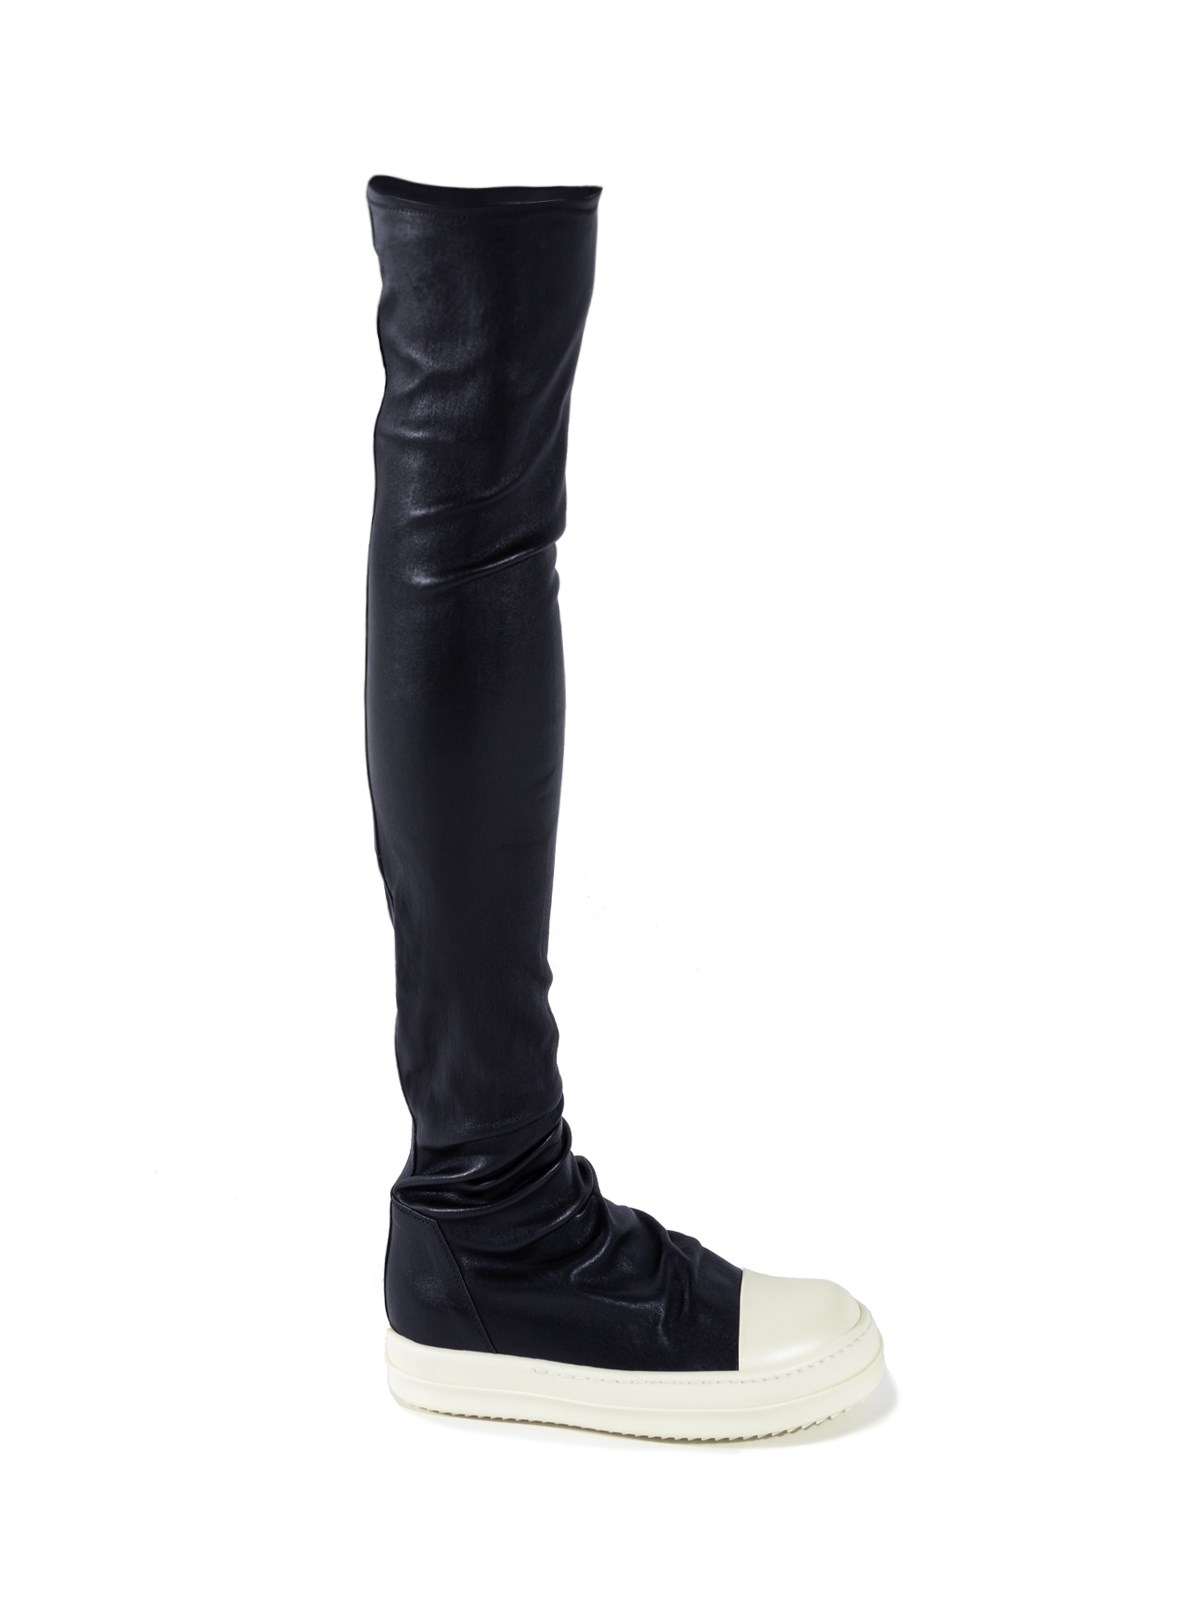 RICK OWENS 'STOCKING' BOOTS